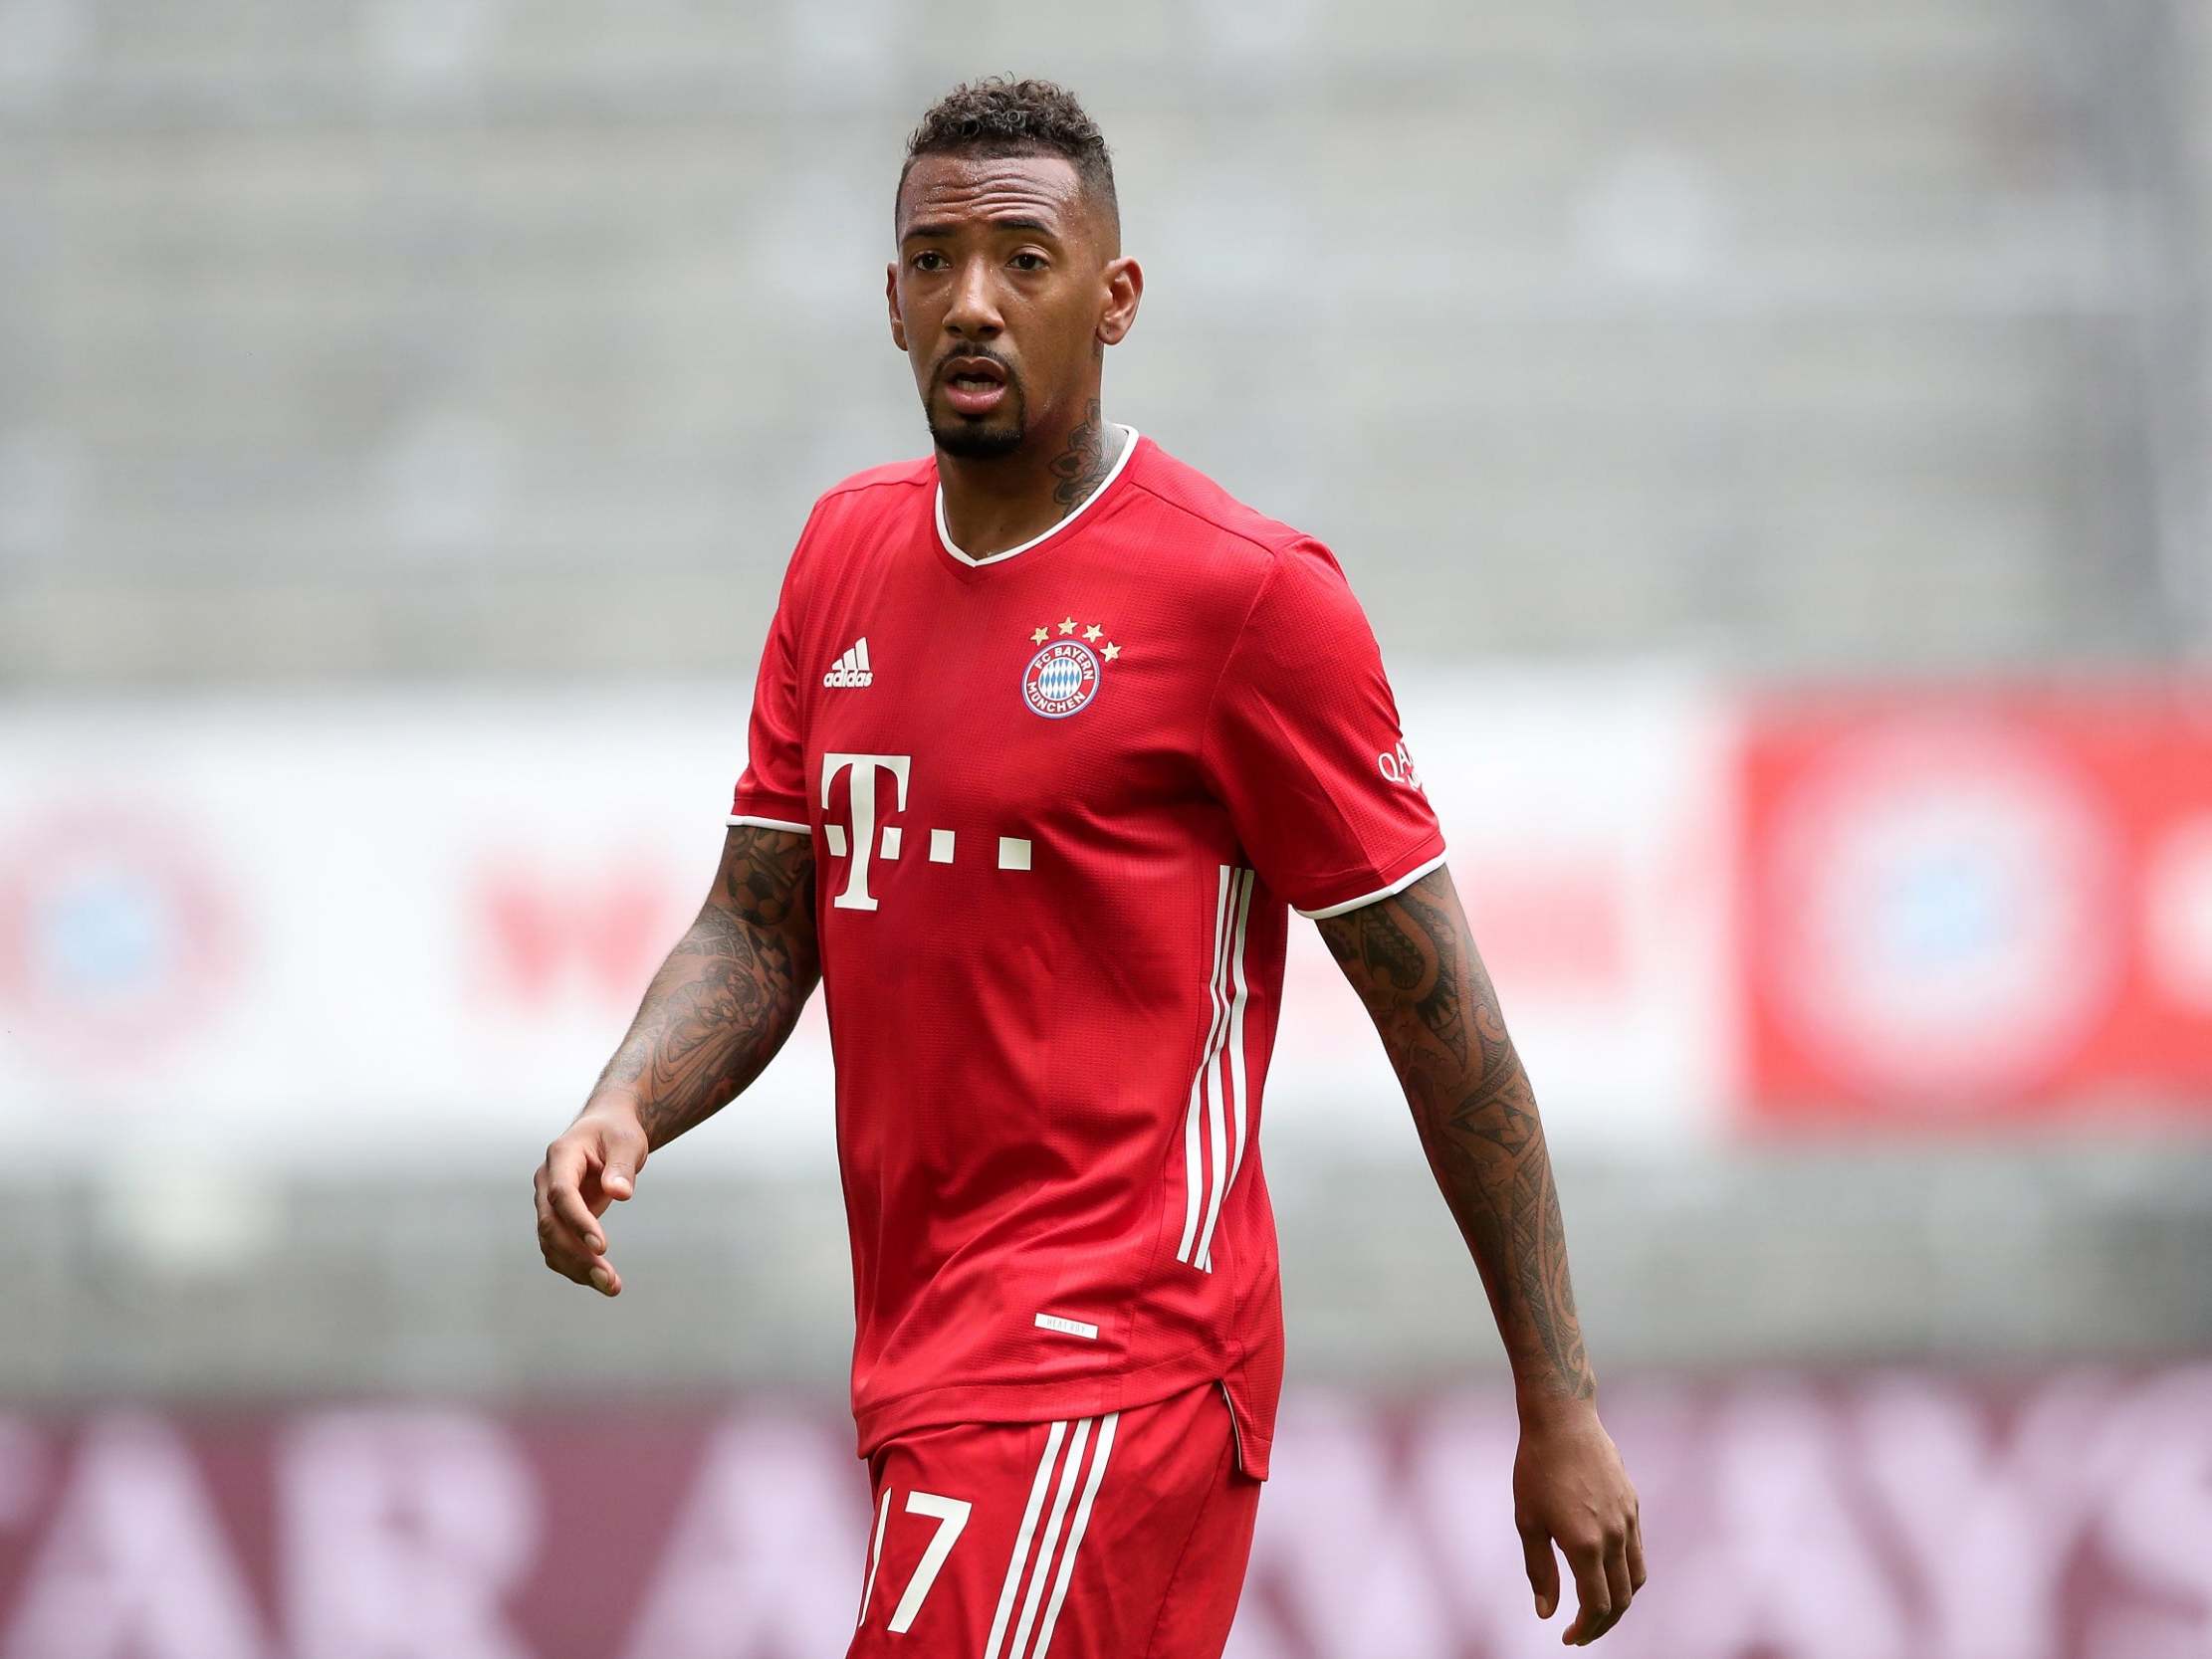 Jerome Boateng calls for players to take the knee in Champions League to keep fighting racism